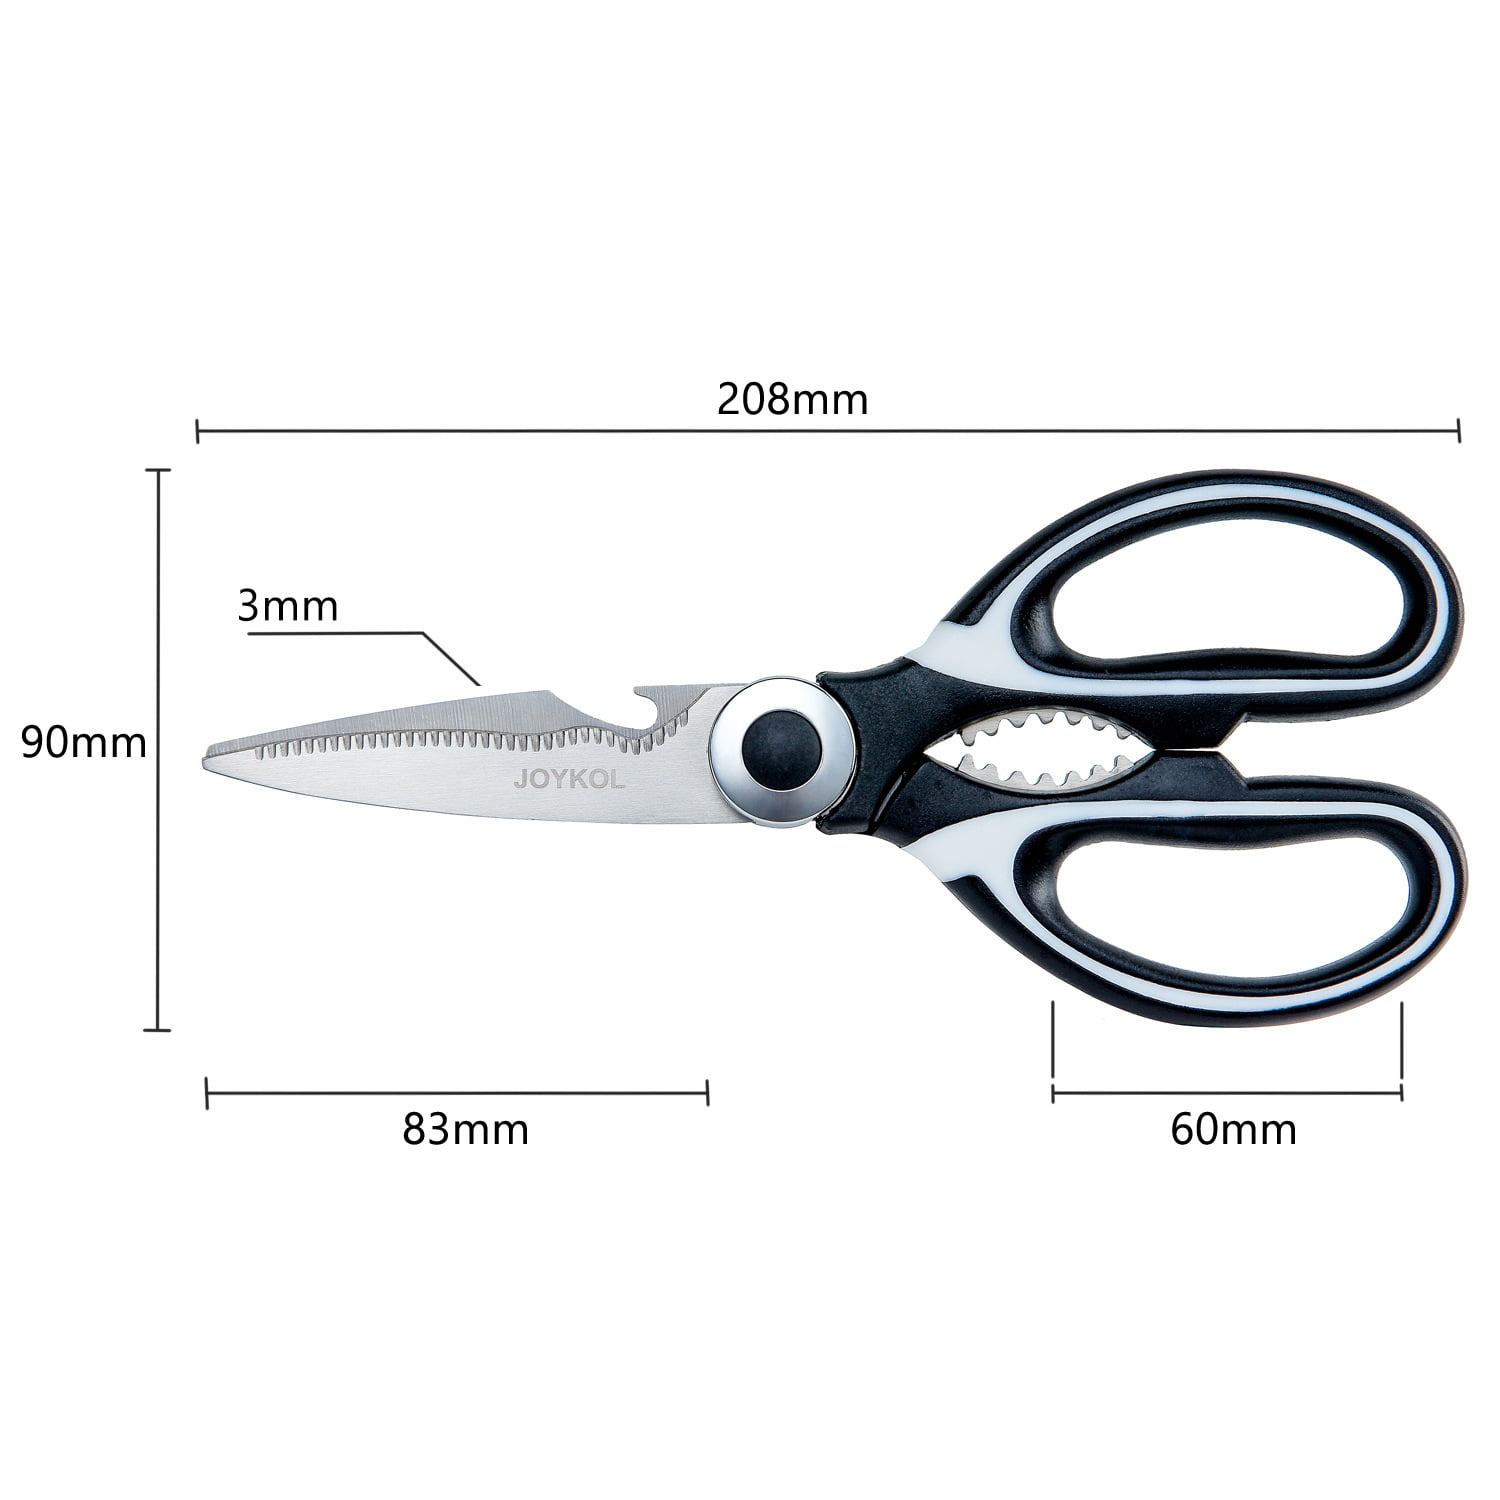 Proshear Kitchen Scissors Come-Apart Kitchen Shears Heavy-Duty Cooking Scissors Multipurpose for Cutting Chicken Meat Poultry Vegetables Herbs Turkey